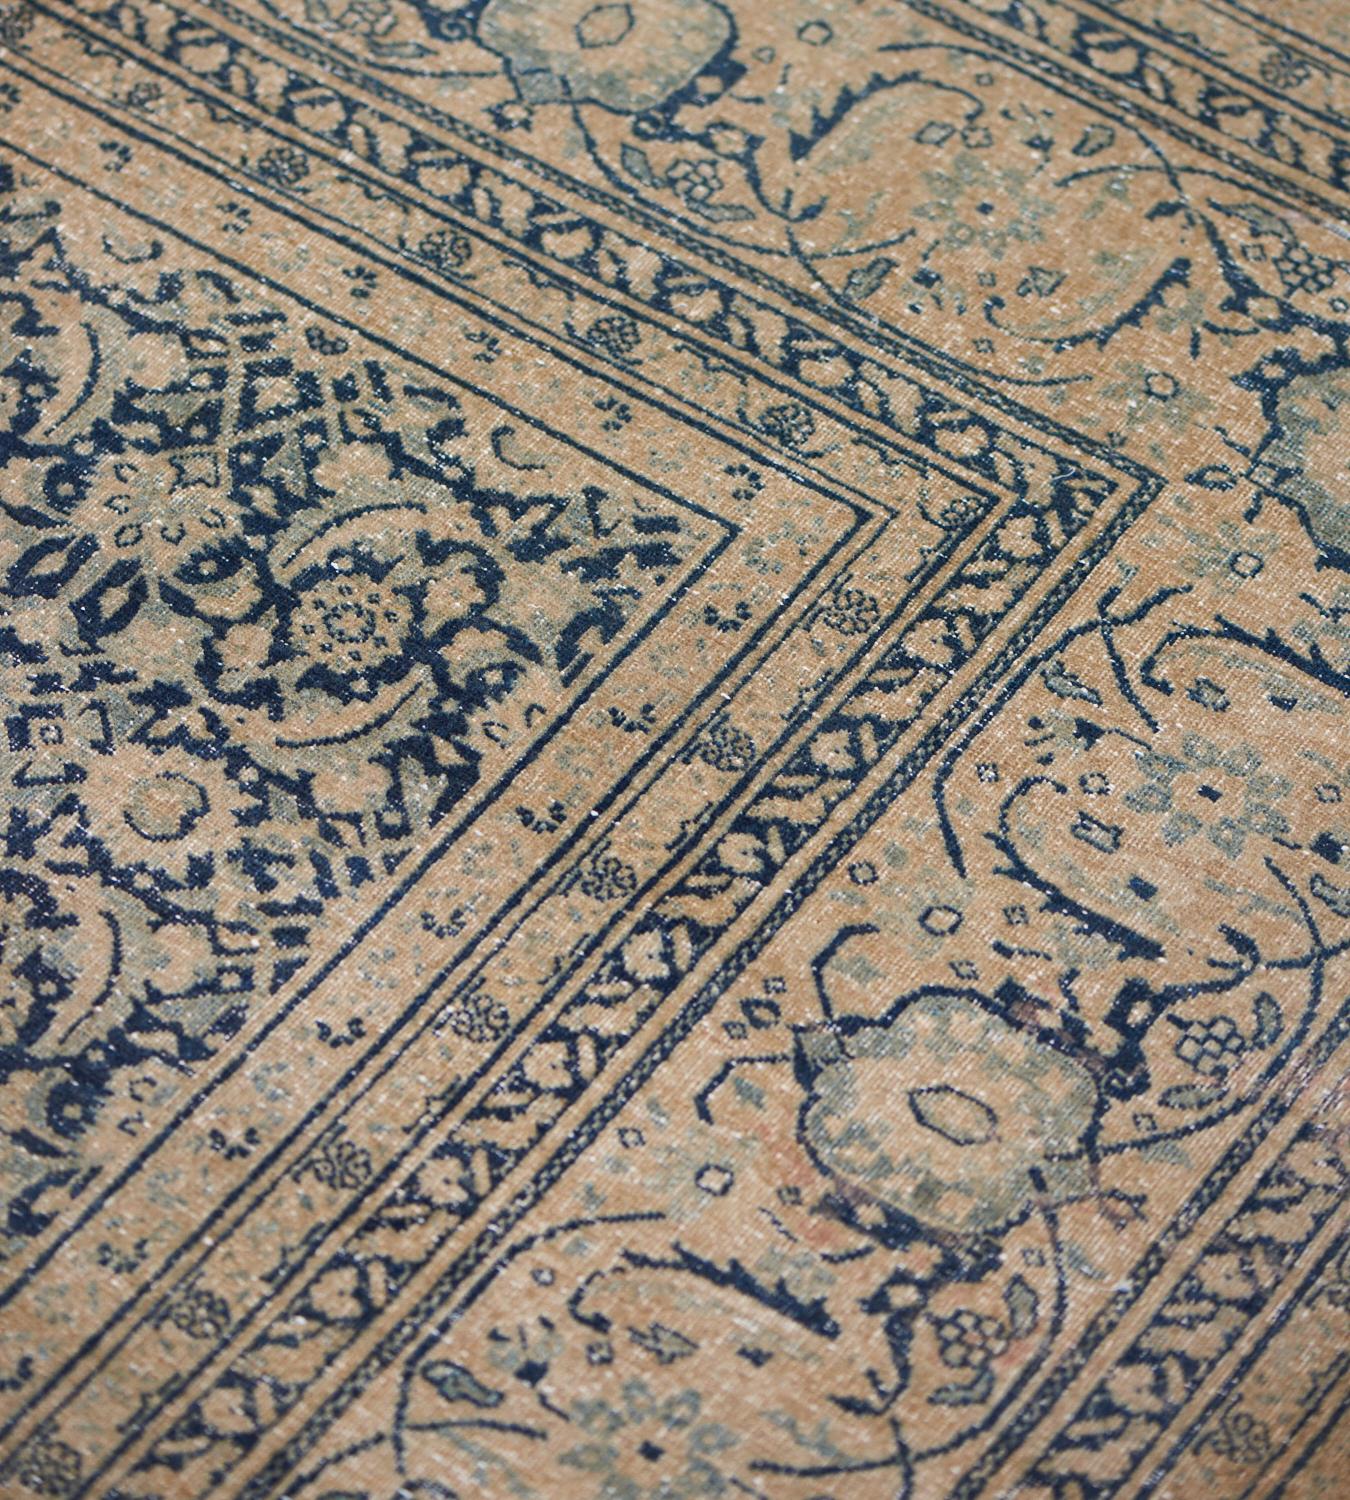 This antique, circa 1900, Persian Tabriz rug has a shaded royal-blue field with an overall buff-brown herati-pattern, in a buff-brown turtle-palmette and meandering floral vine border between buff-brown and shaded royal-blue triple floral vine